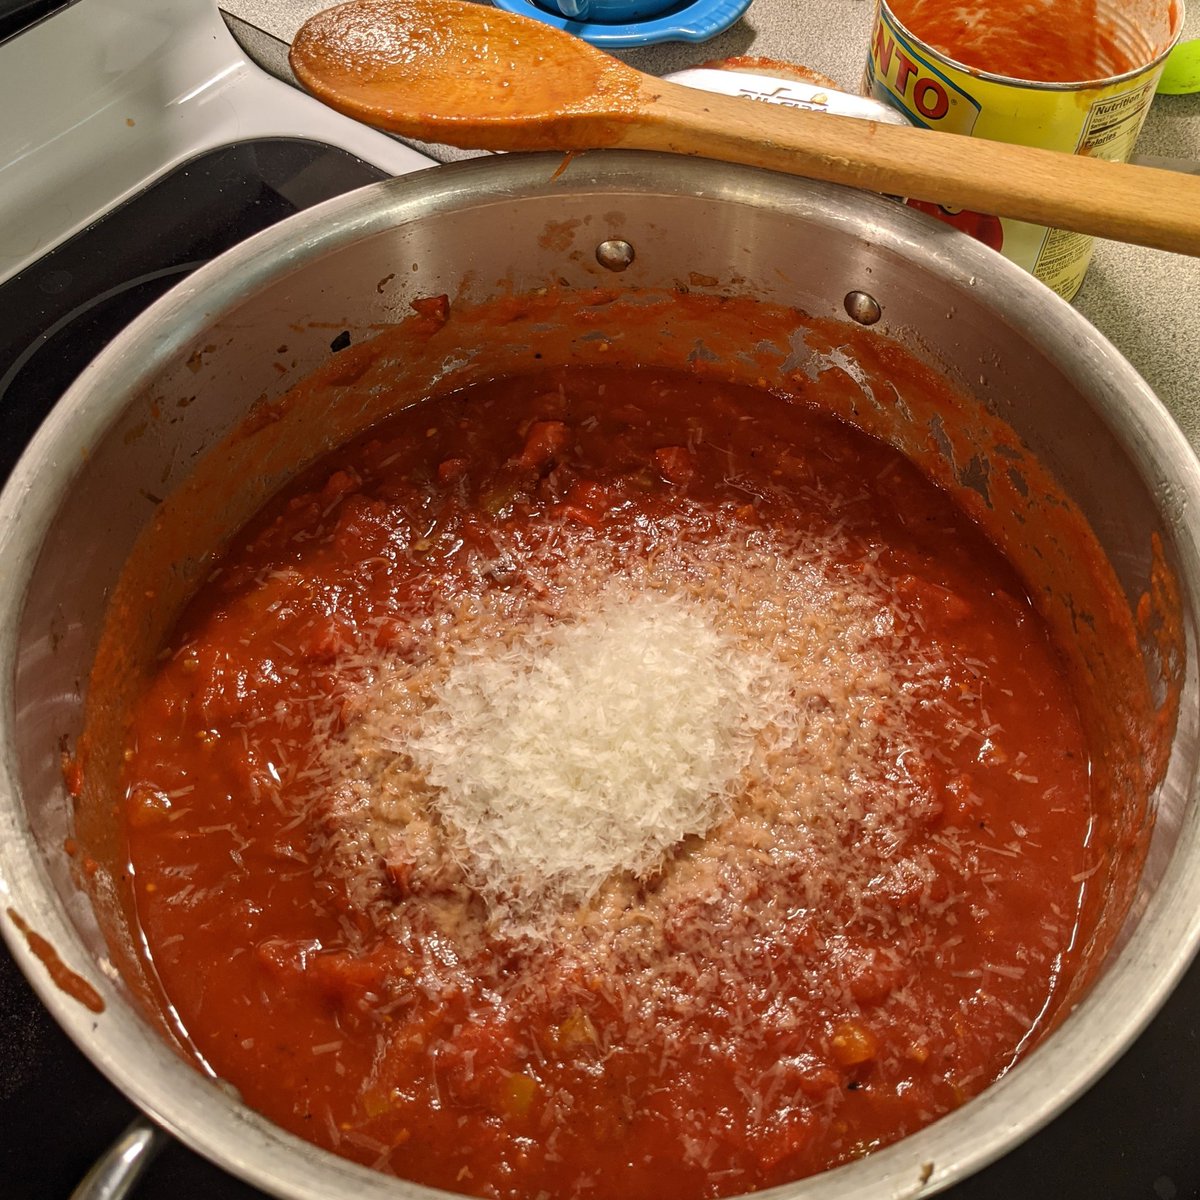 Four 15oz cans of tomatoes - two of them San Marzano. (In better years, I would start from fresh.) And I found a small cube of parm in the fridge that had to go. 5/8